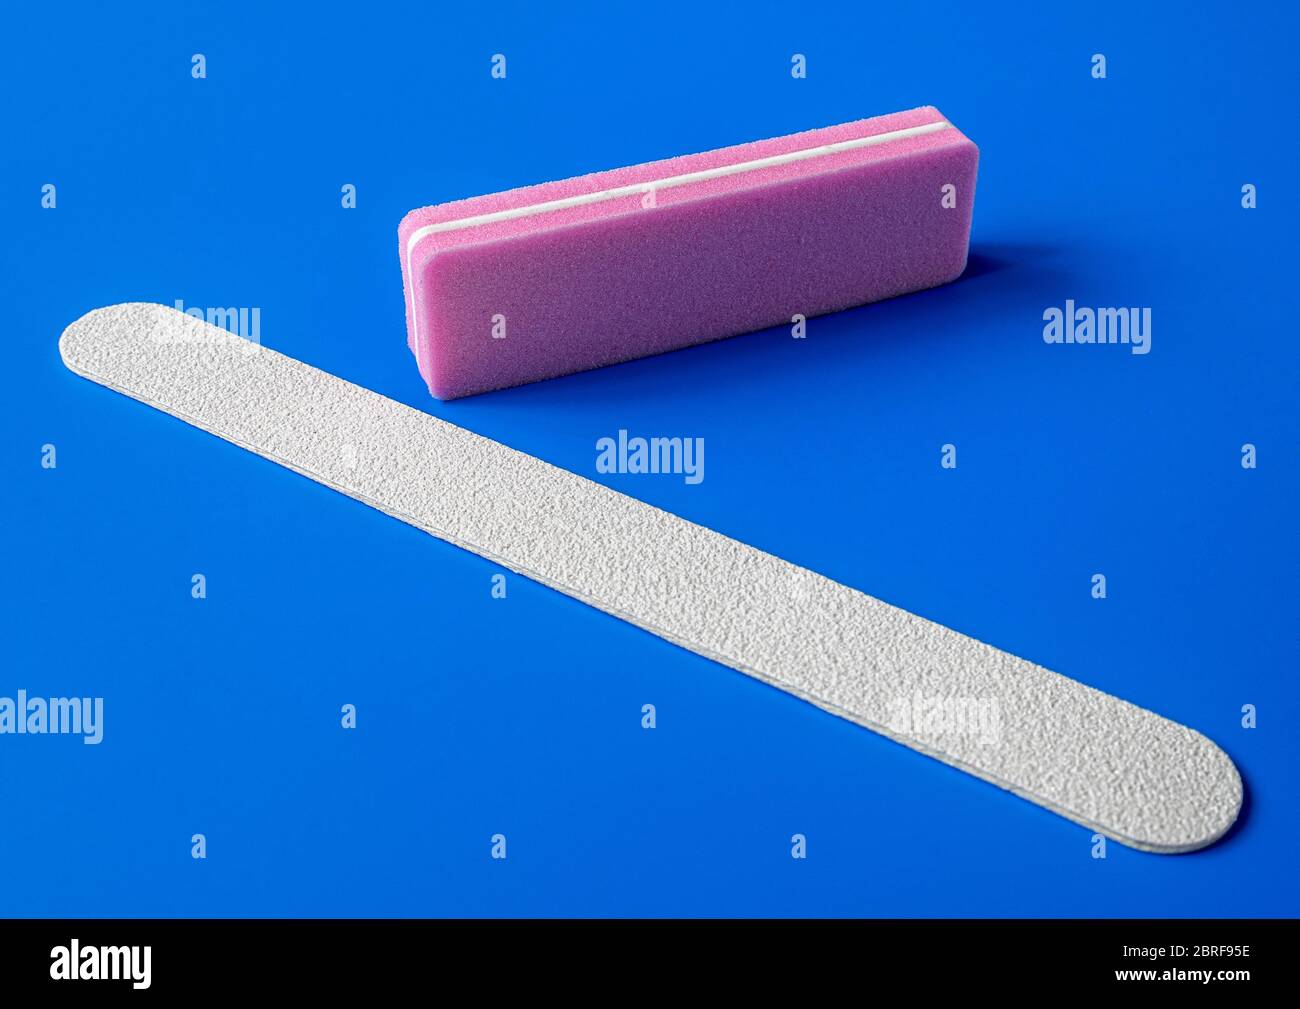 Sanding file sponge for manicure and nailfile on a blue background Stock Photo